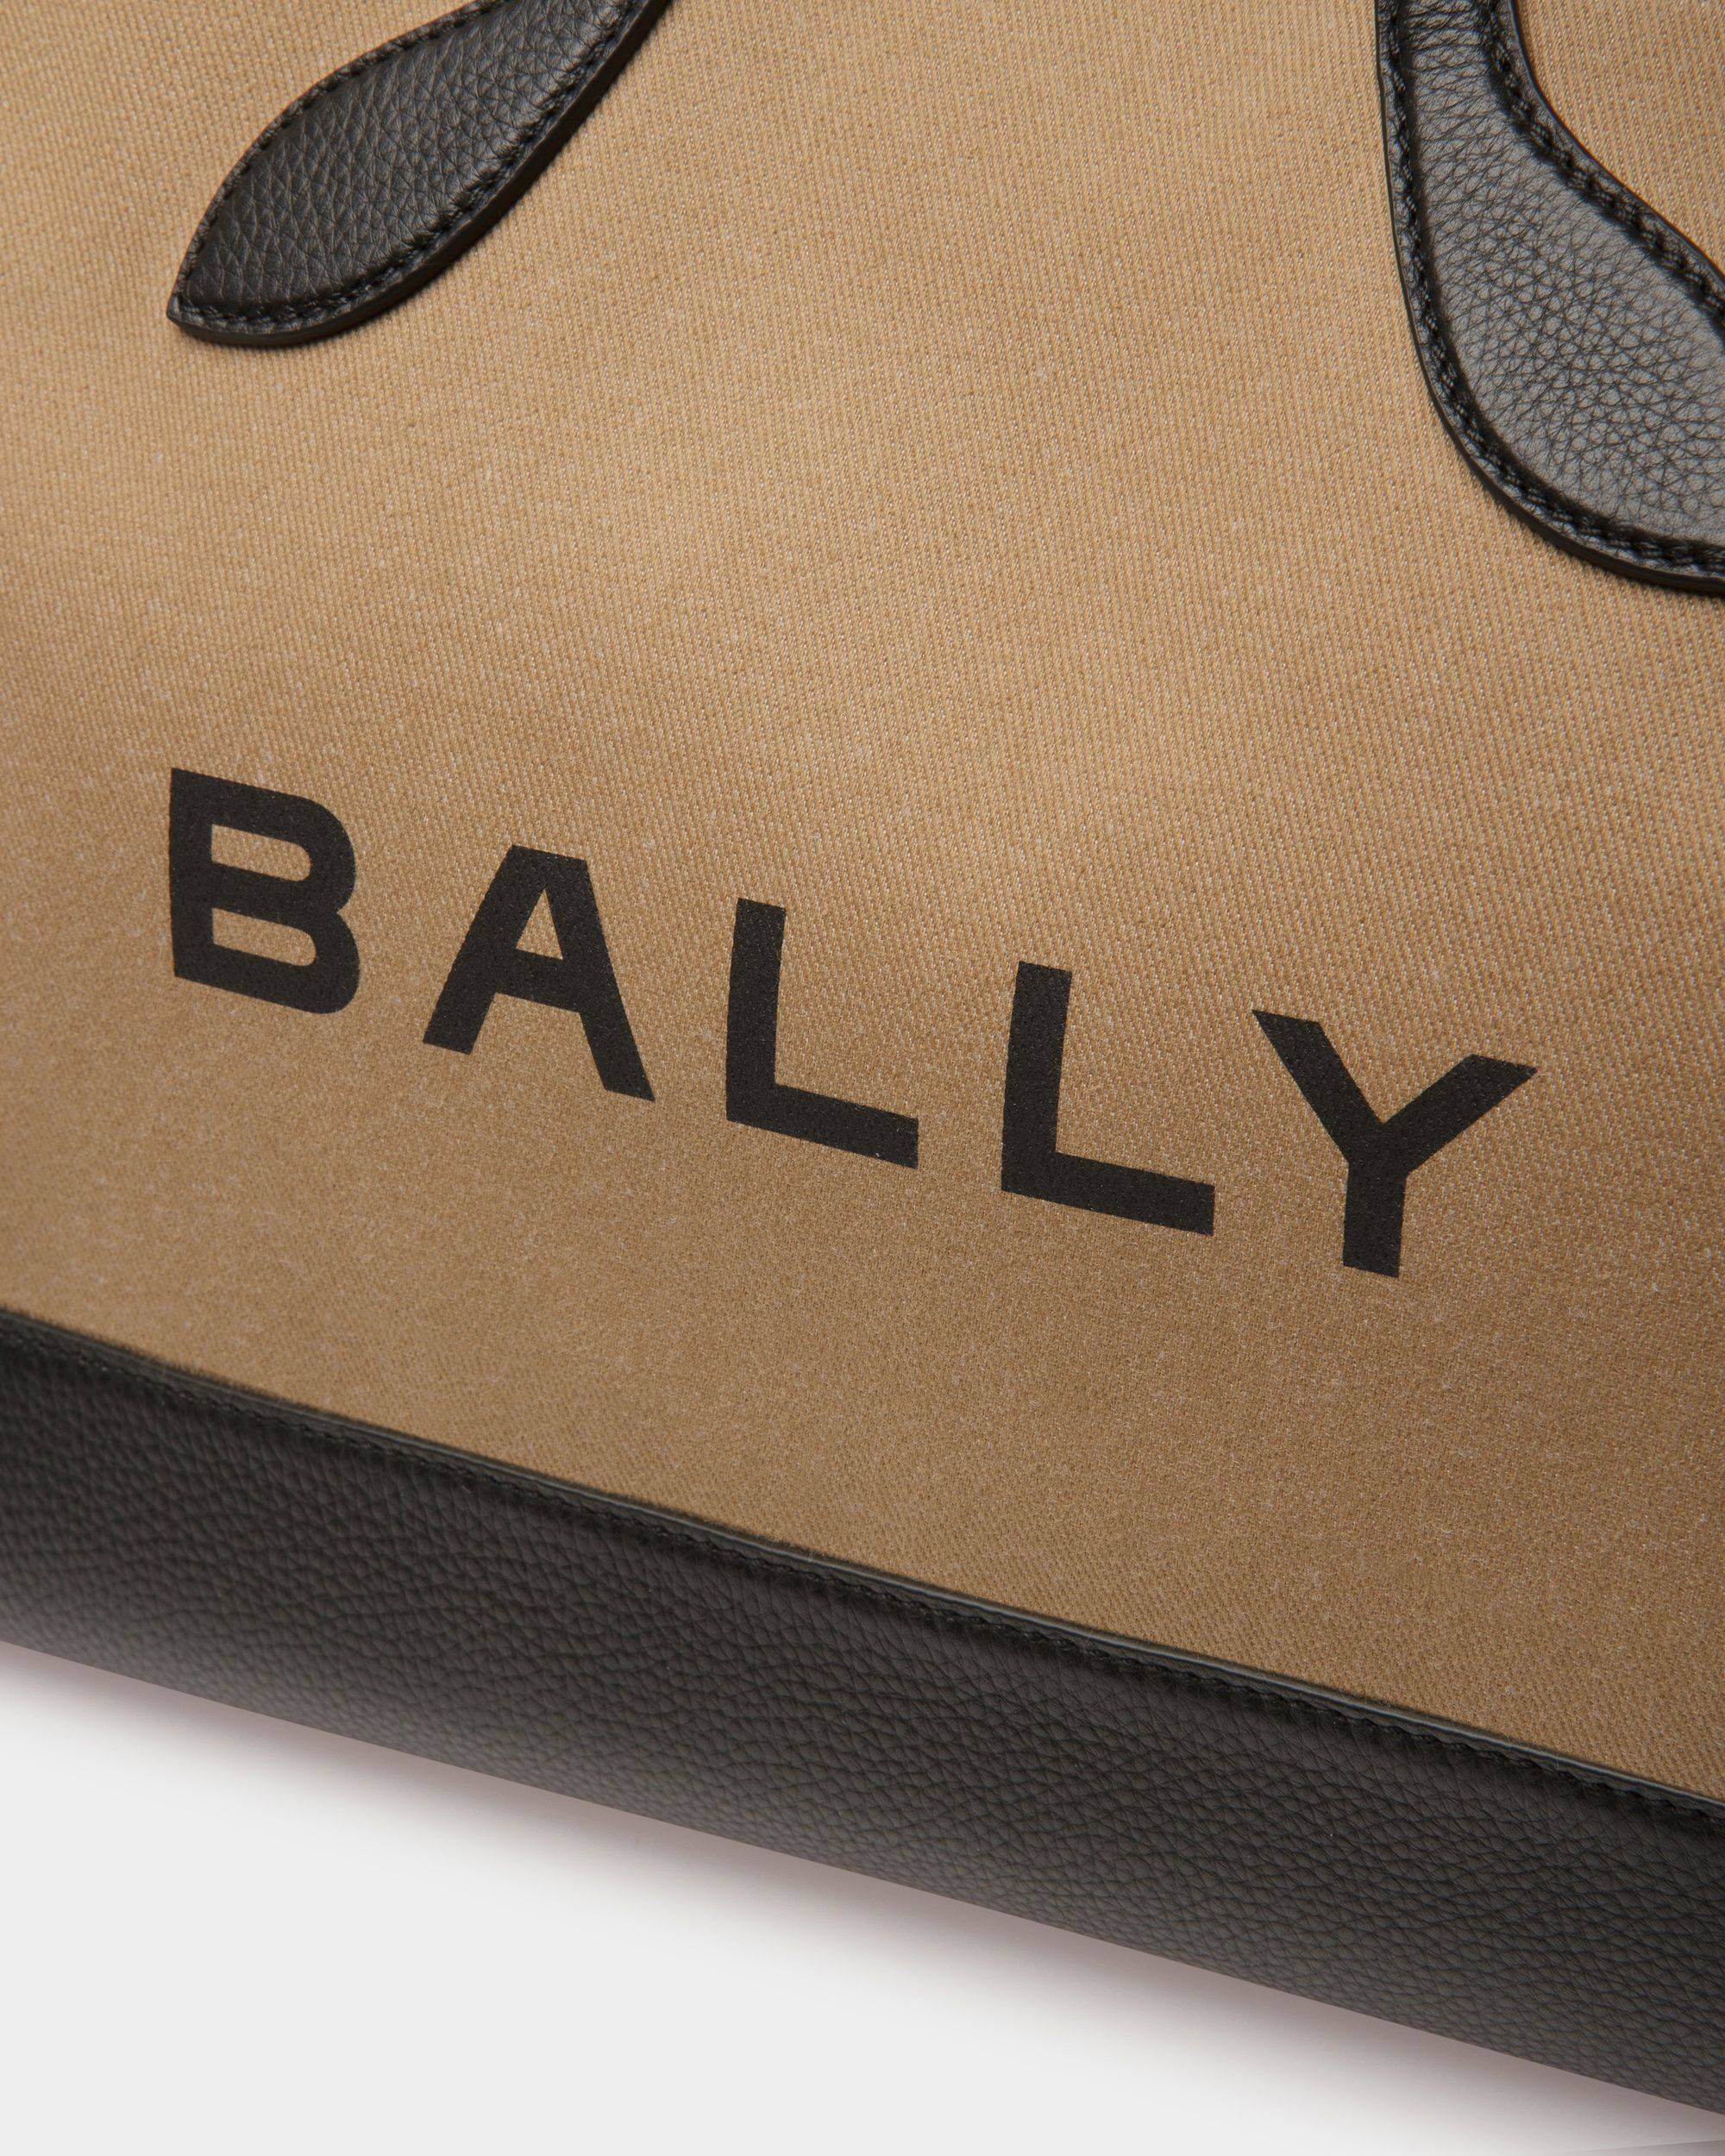 Keep On Ew | Women's Tote Bag | Sand And Black Fabric | Bally | Still Life Detail